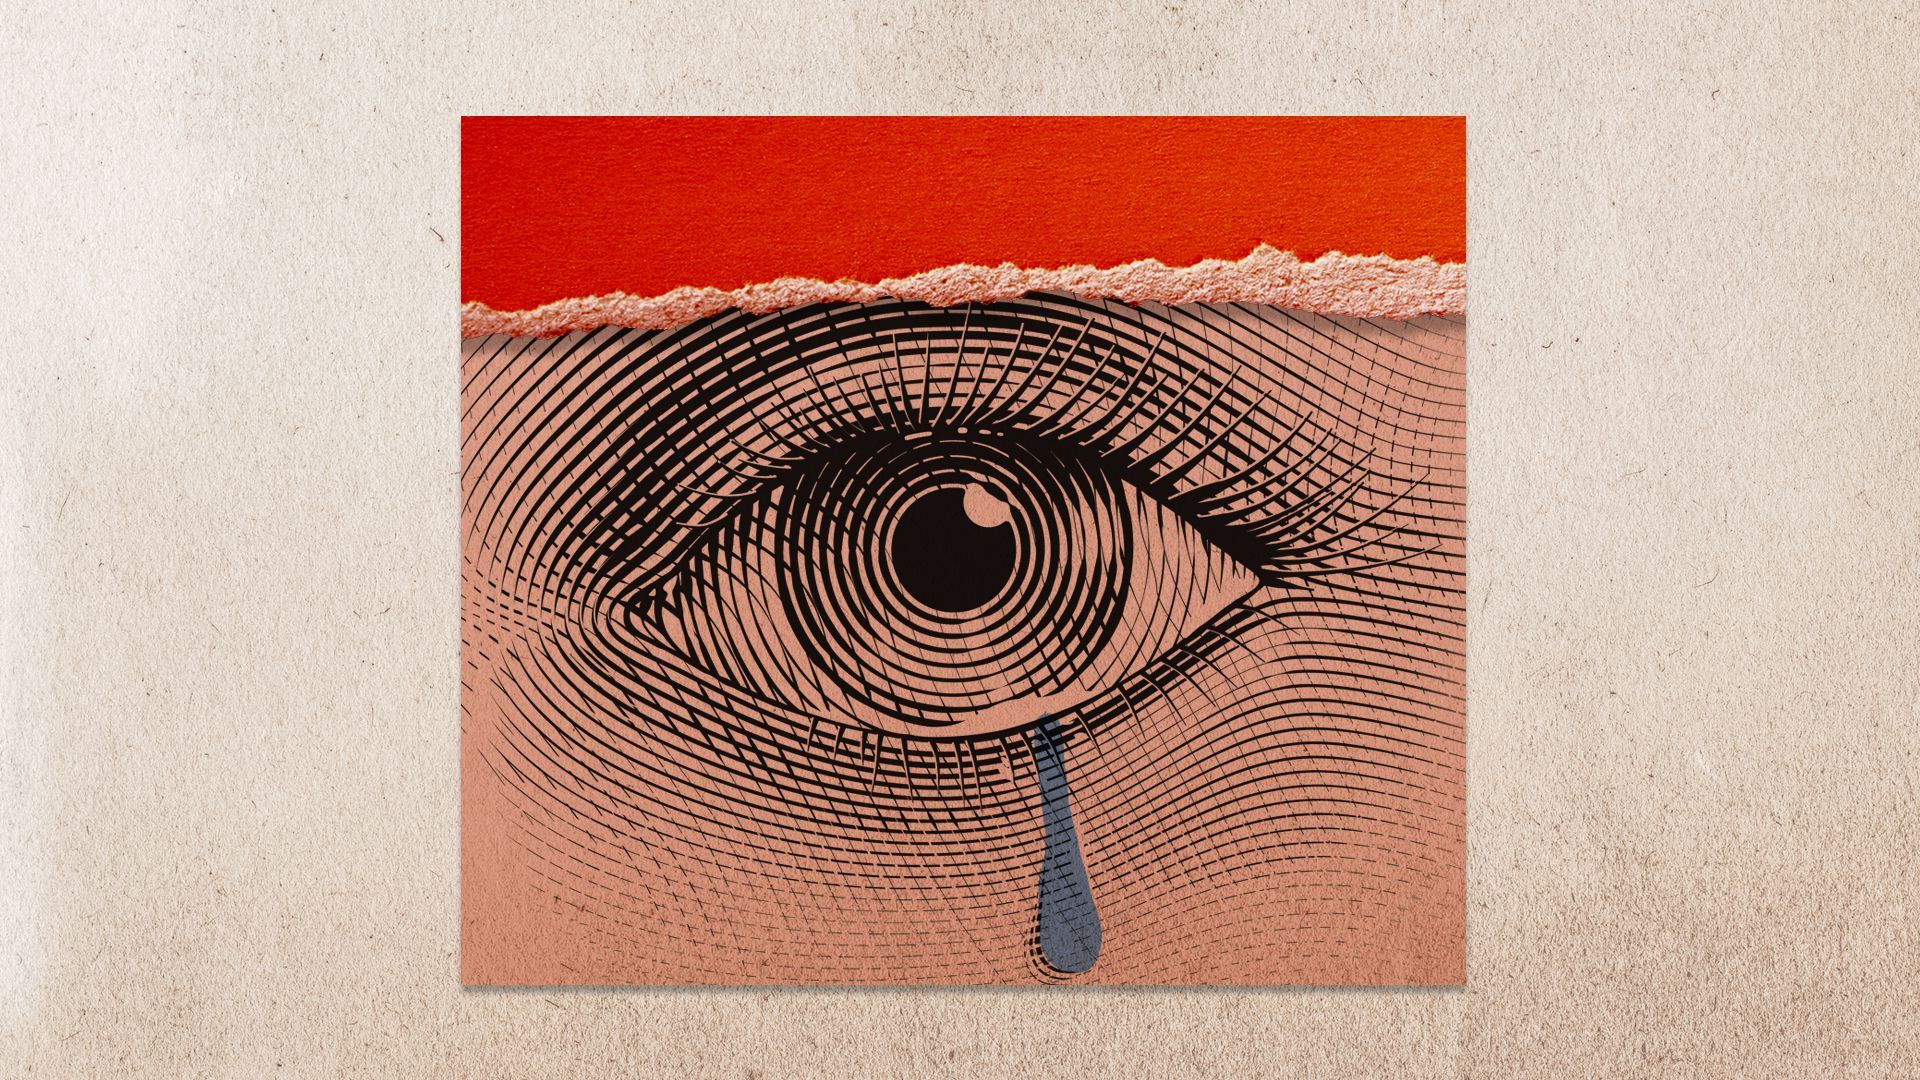 Illustration of an engraved style eye that is crying